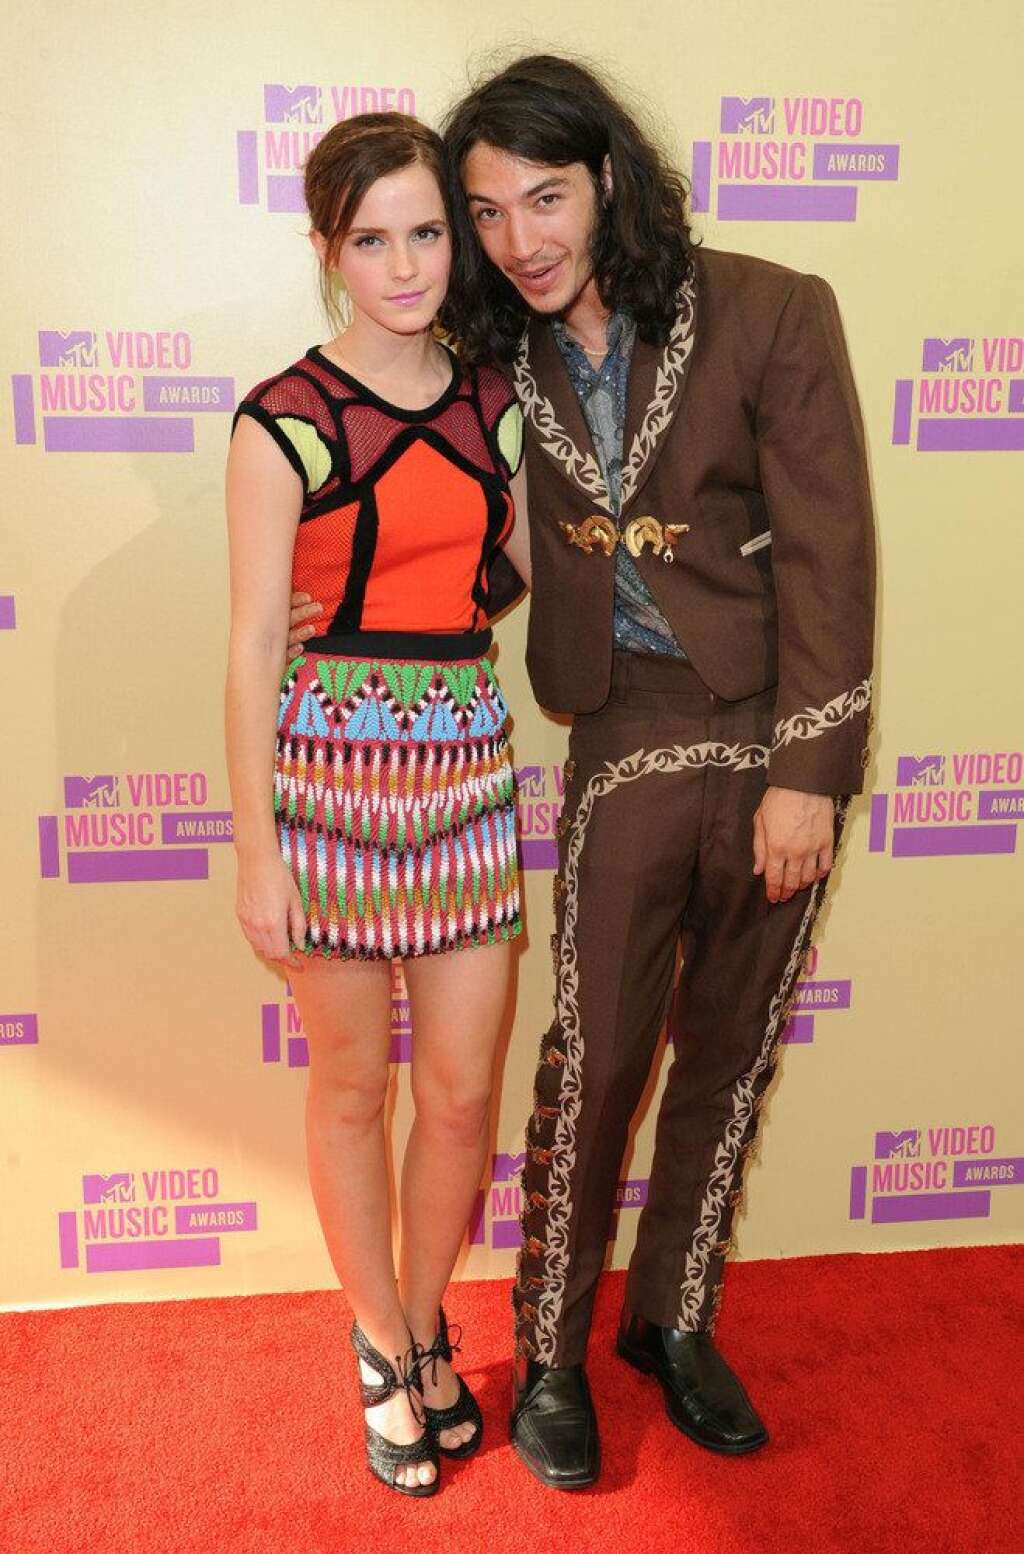 MTV Video Music Awards - Arrivals - Los Angeles - Emma Watson and Ezra Miller arriving at the MTV Video Music Awards, at the Staples Centre, Los Angeles.